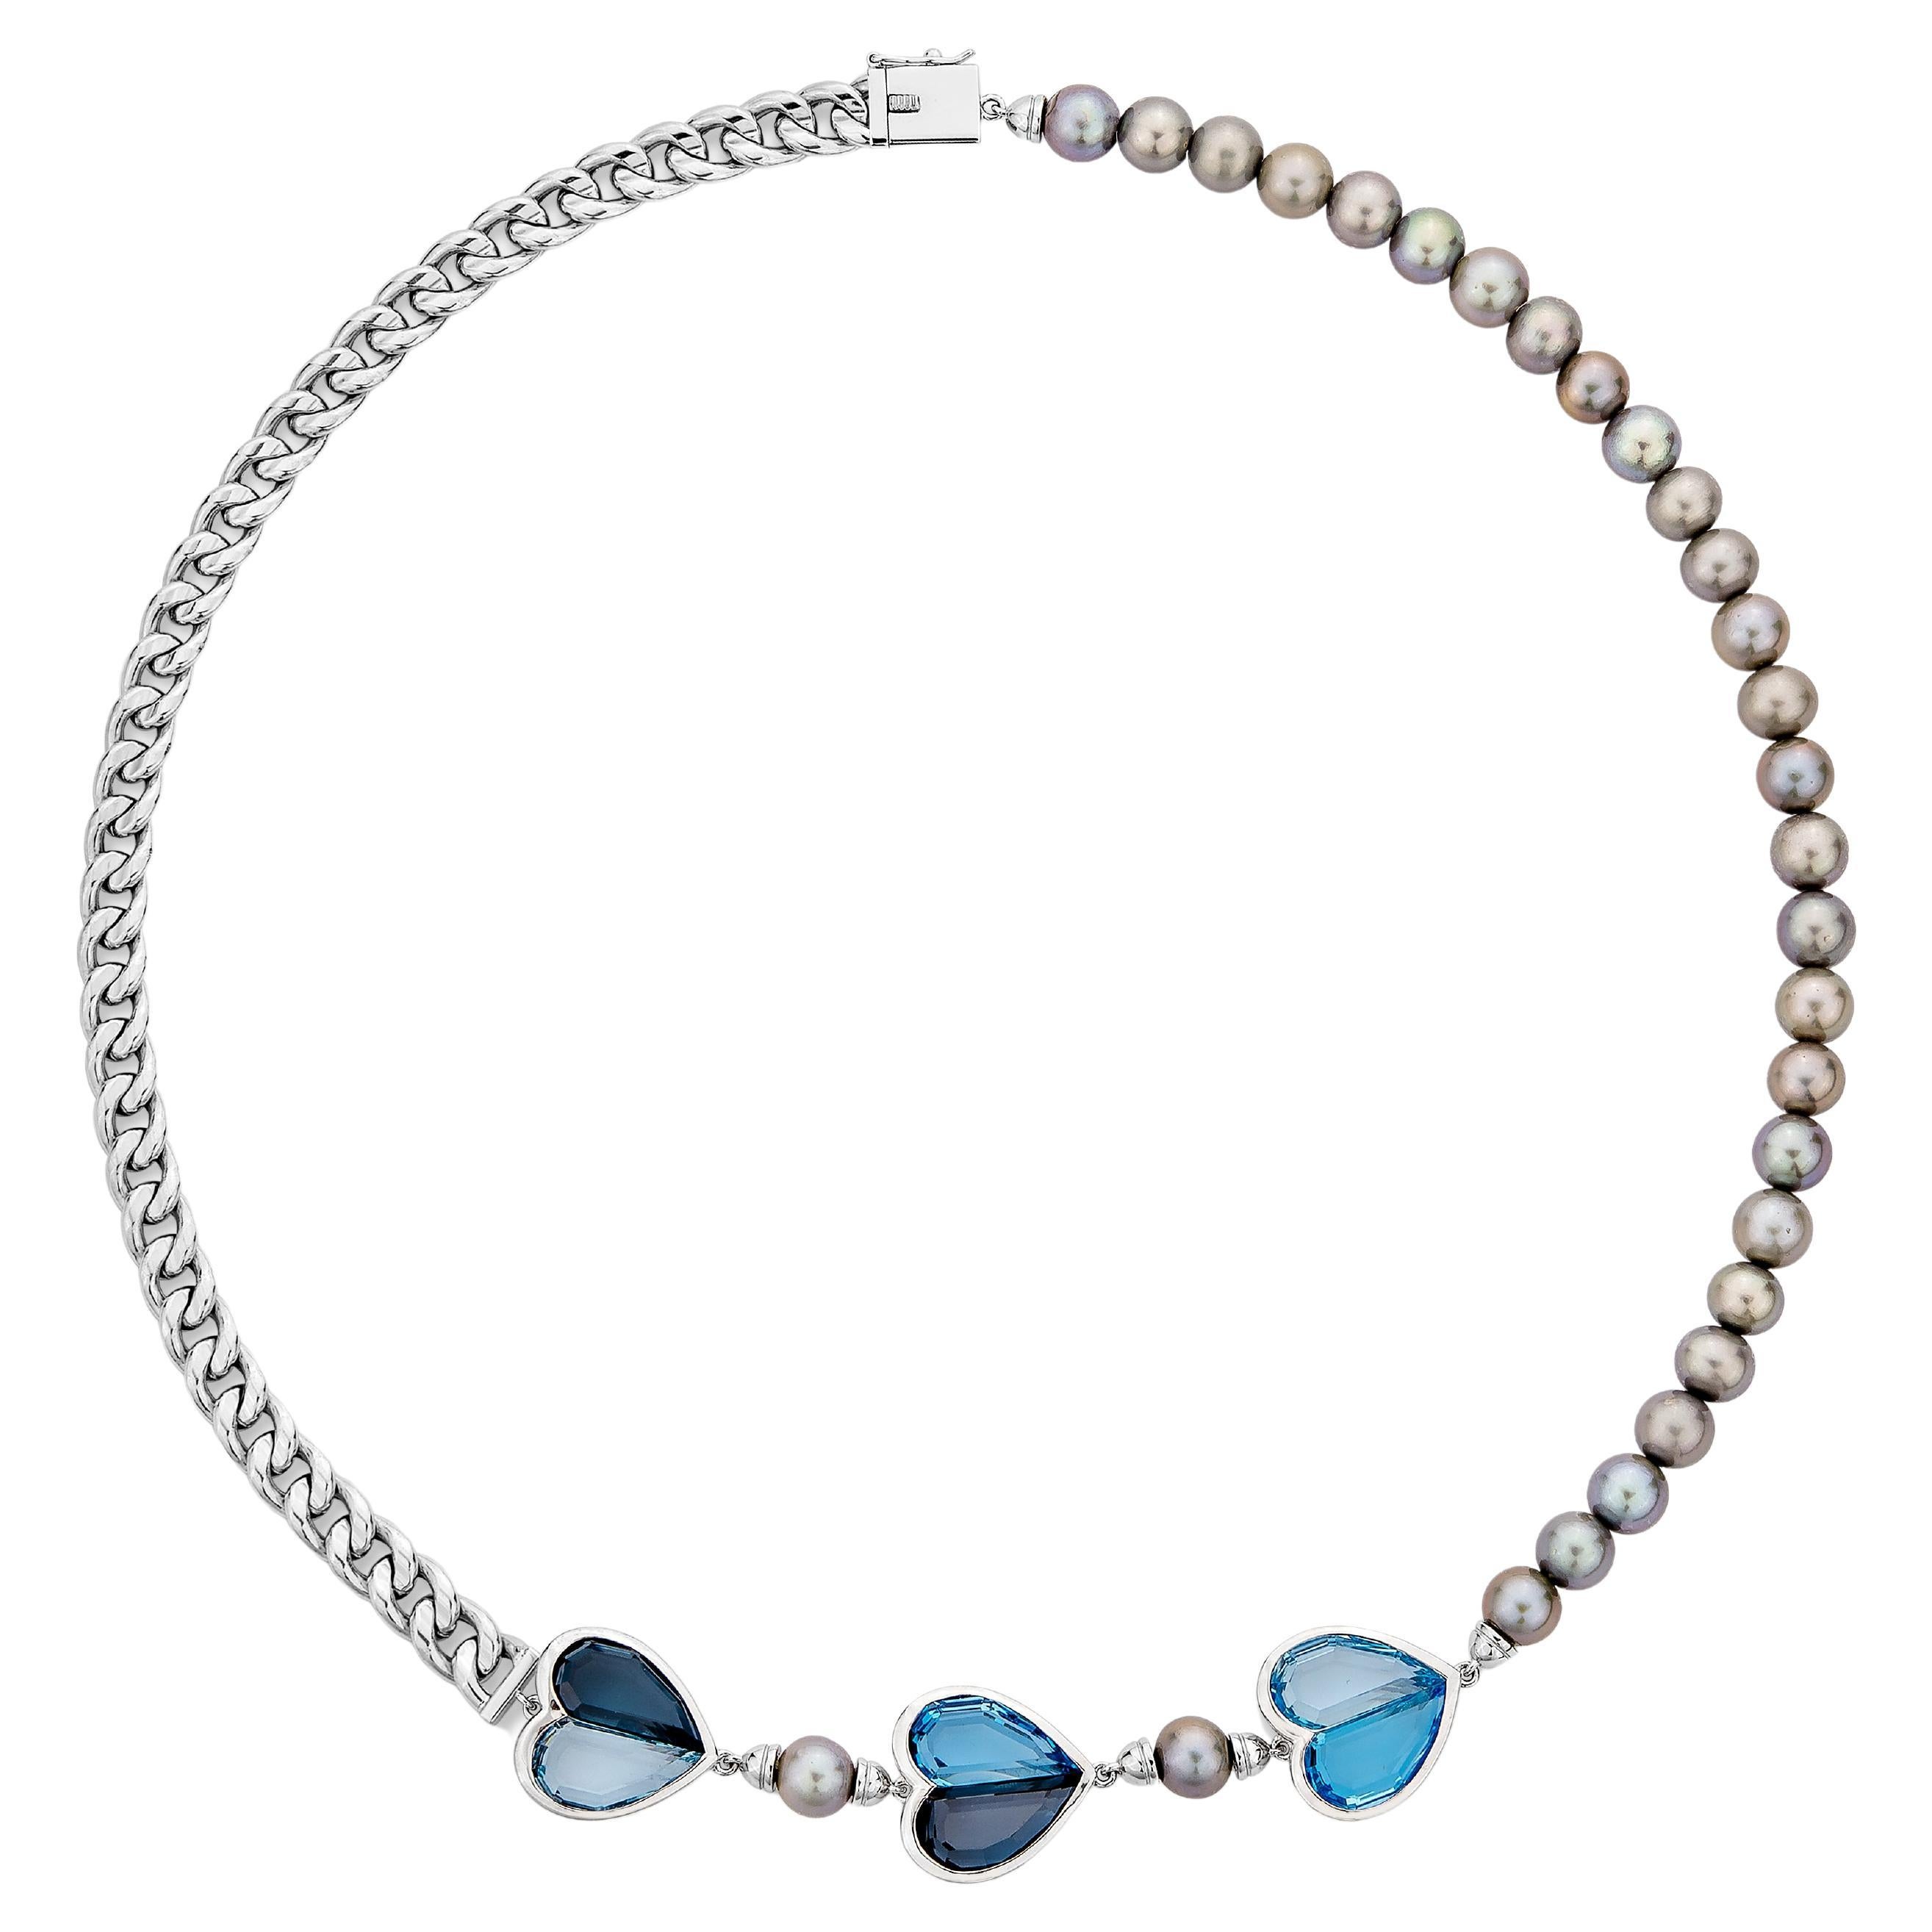 Three's a Crowd Blue Topaz and Grey Pearl Necklace in 18 Karat White Gold